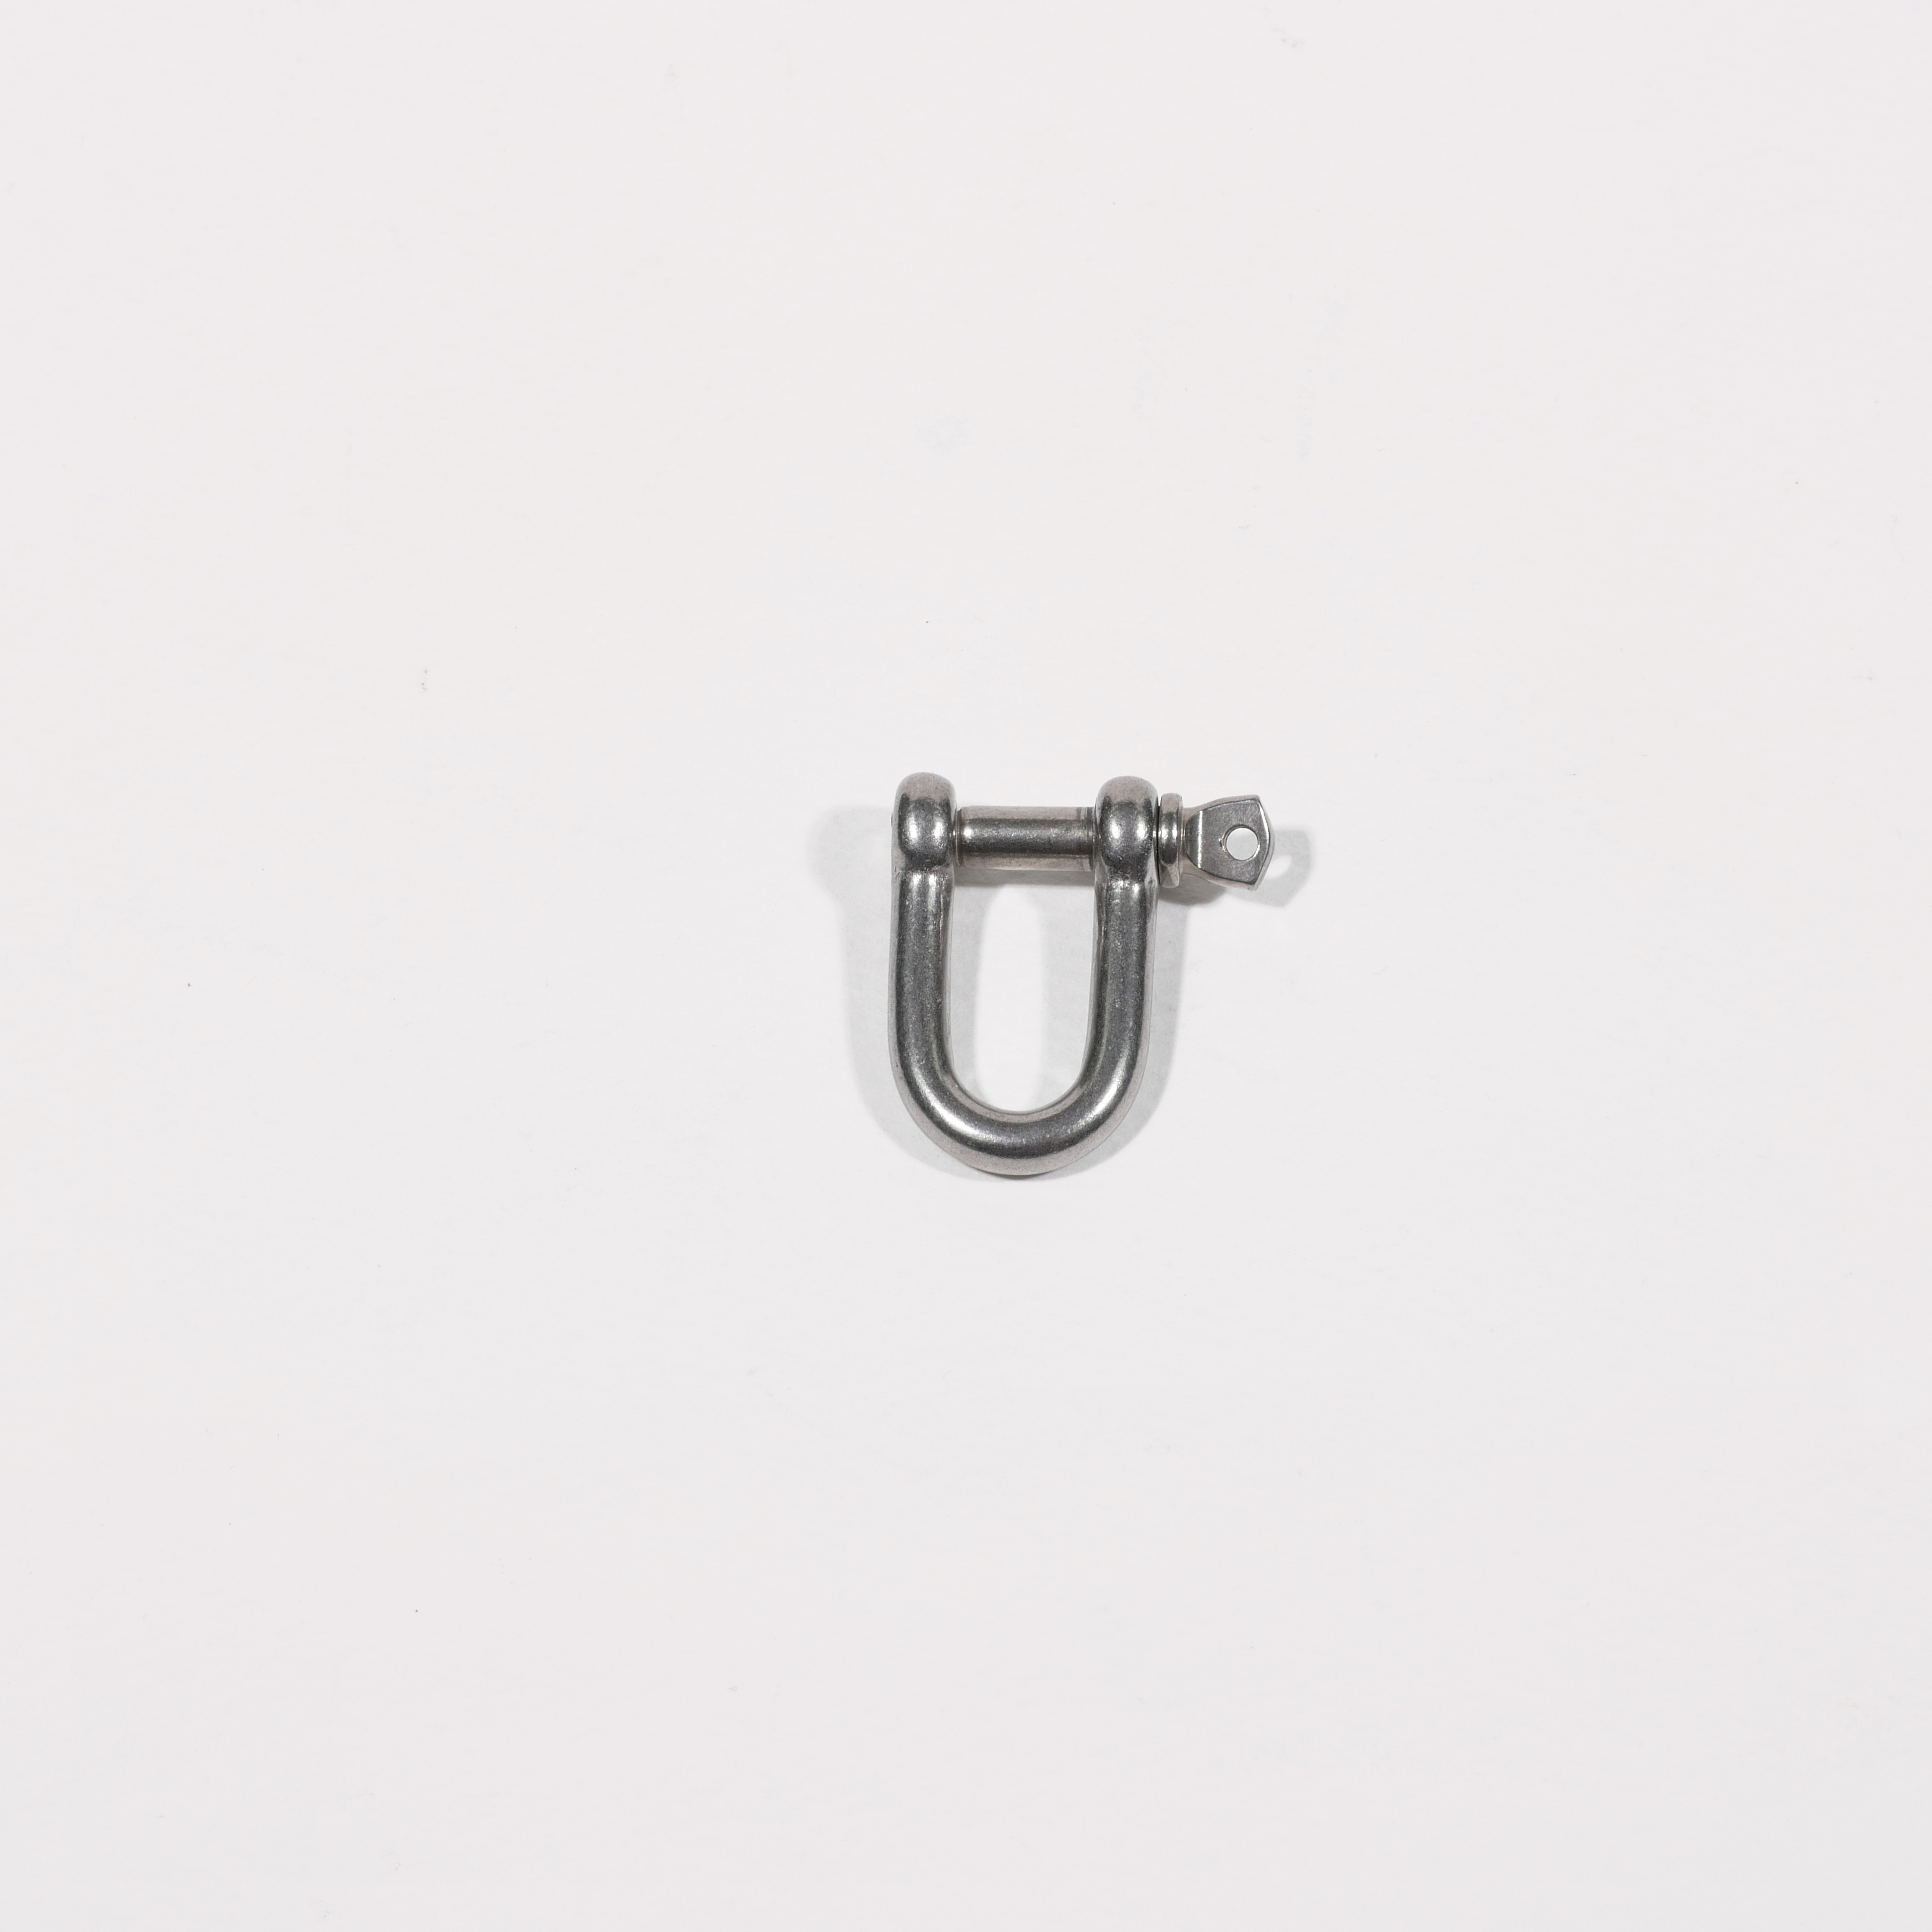 [TO] D shackle 1901-05